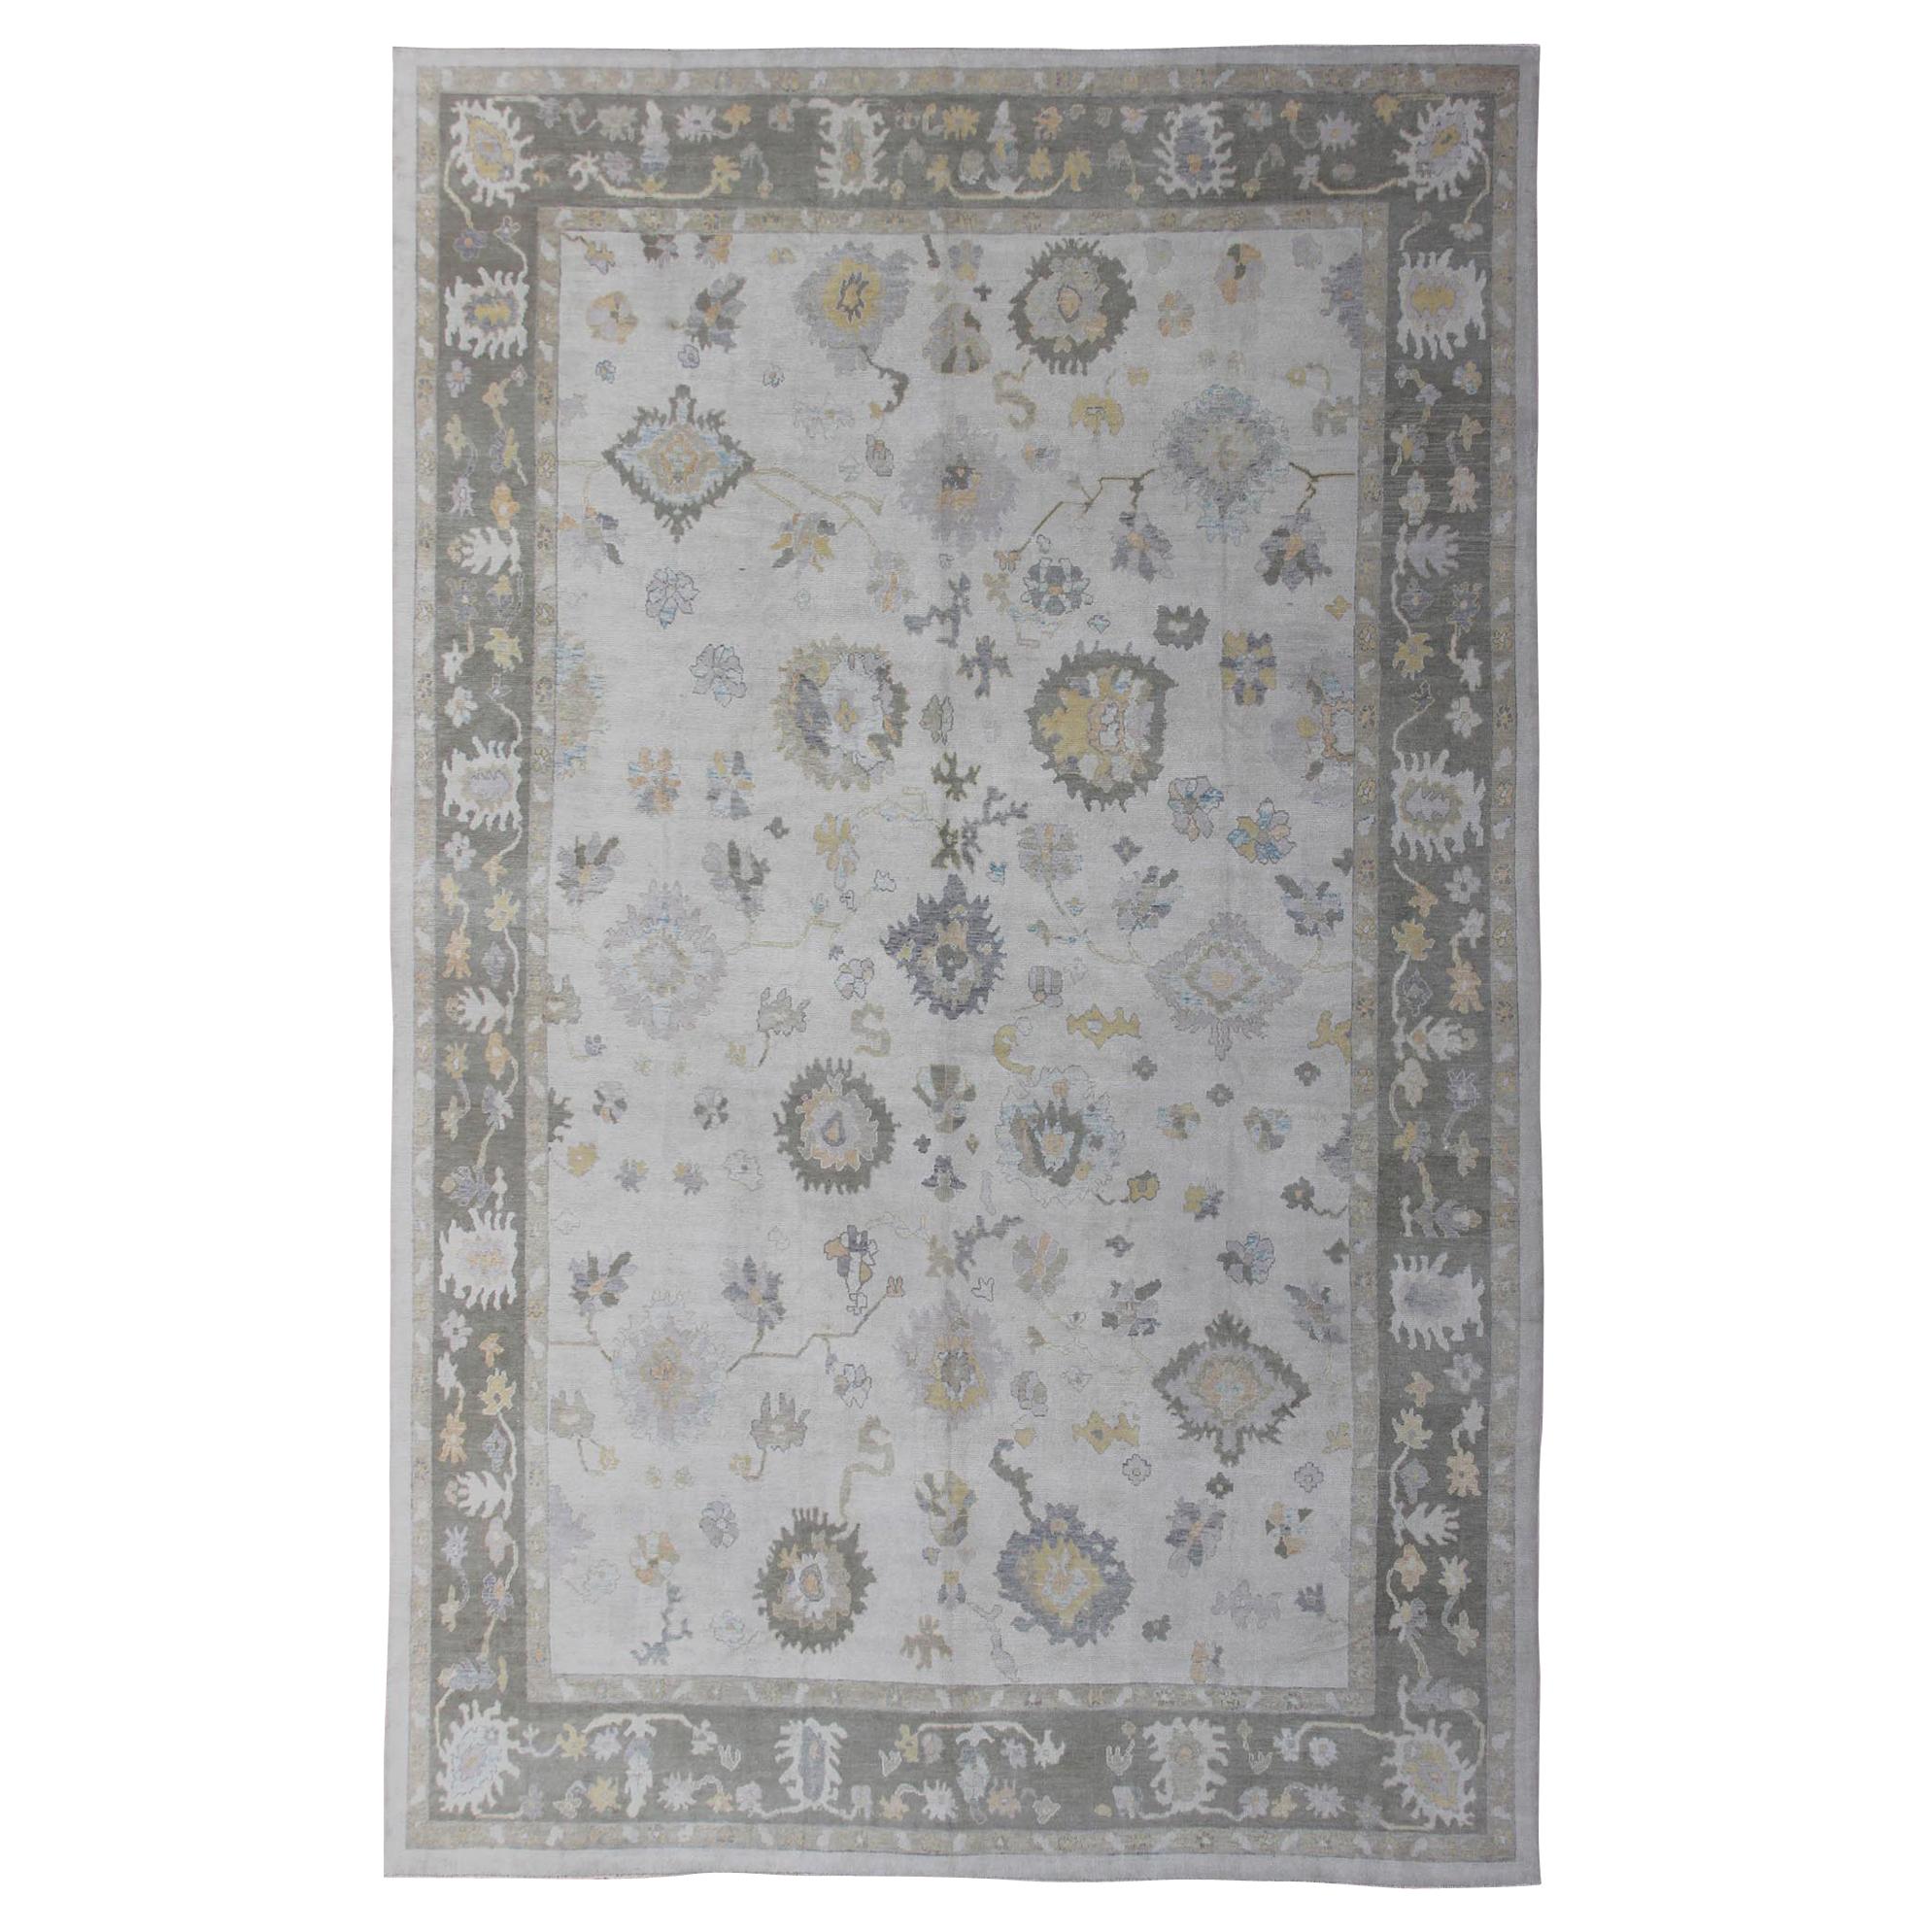 Very Large Turkish Oushak Rug with Neutral Color Palette and All-Over Design